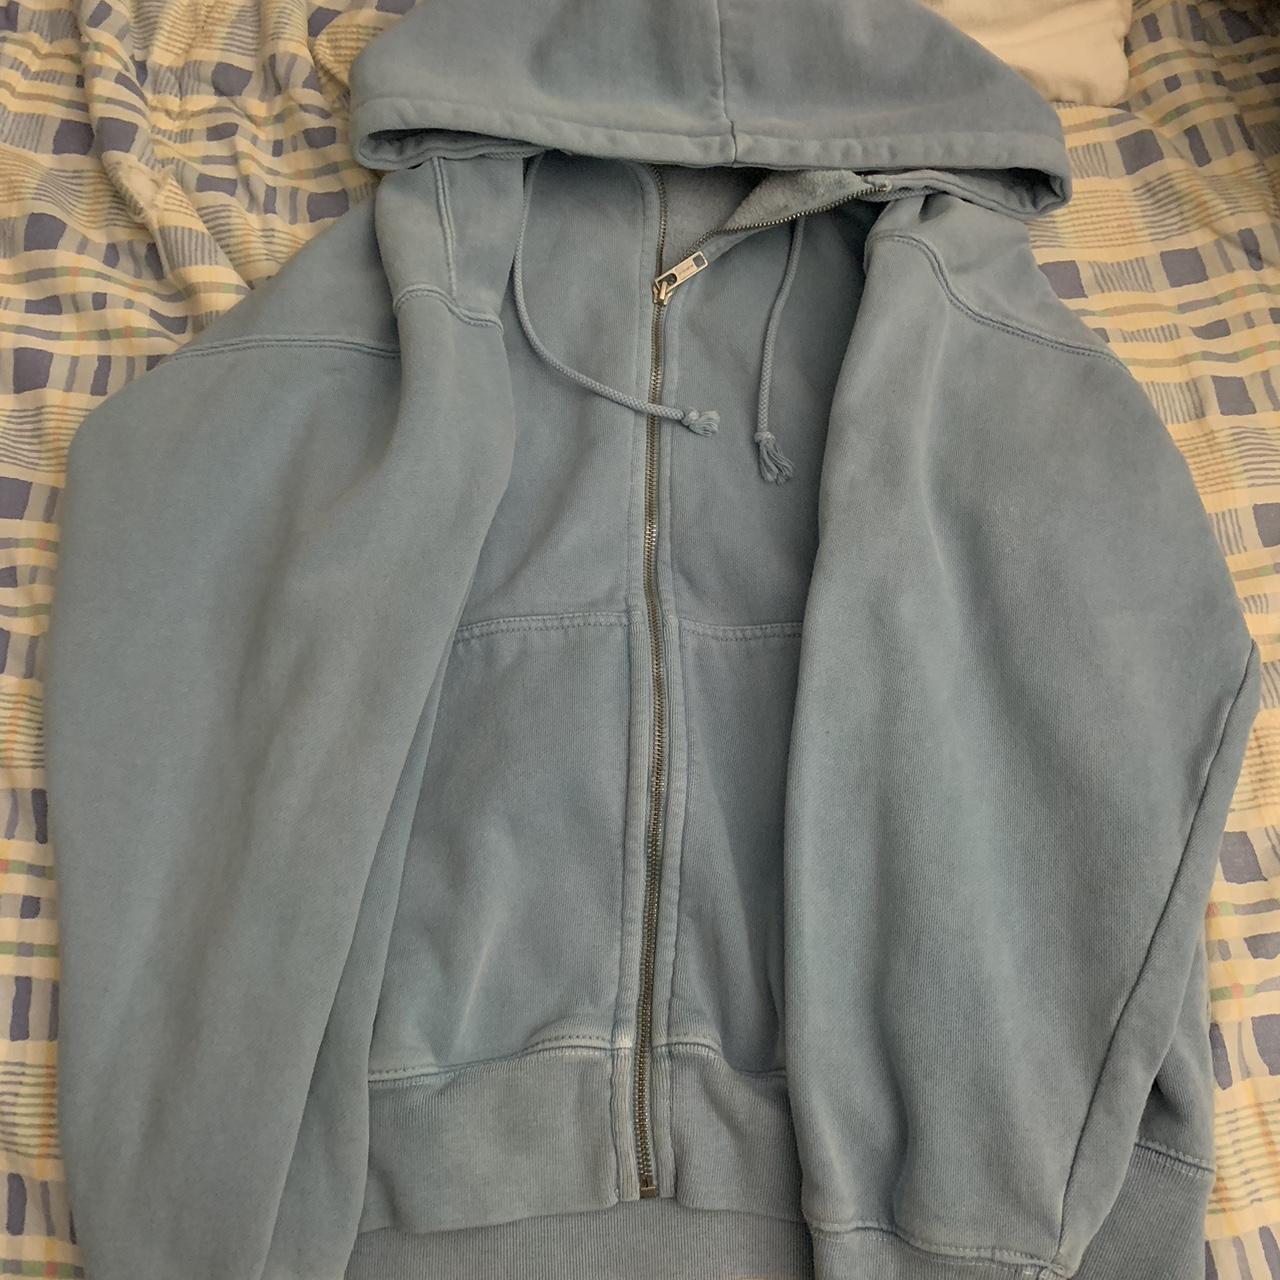 Brandy Melville Gray Hoodies for Women for sale